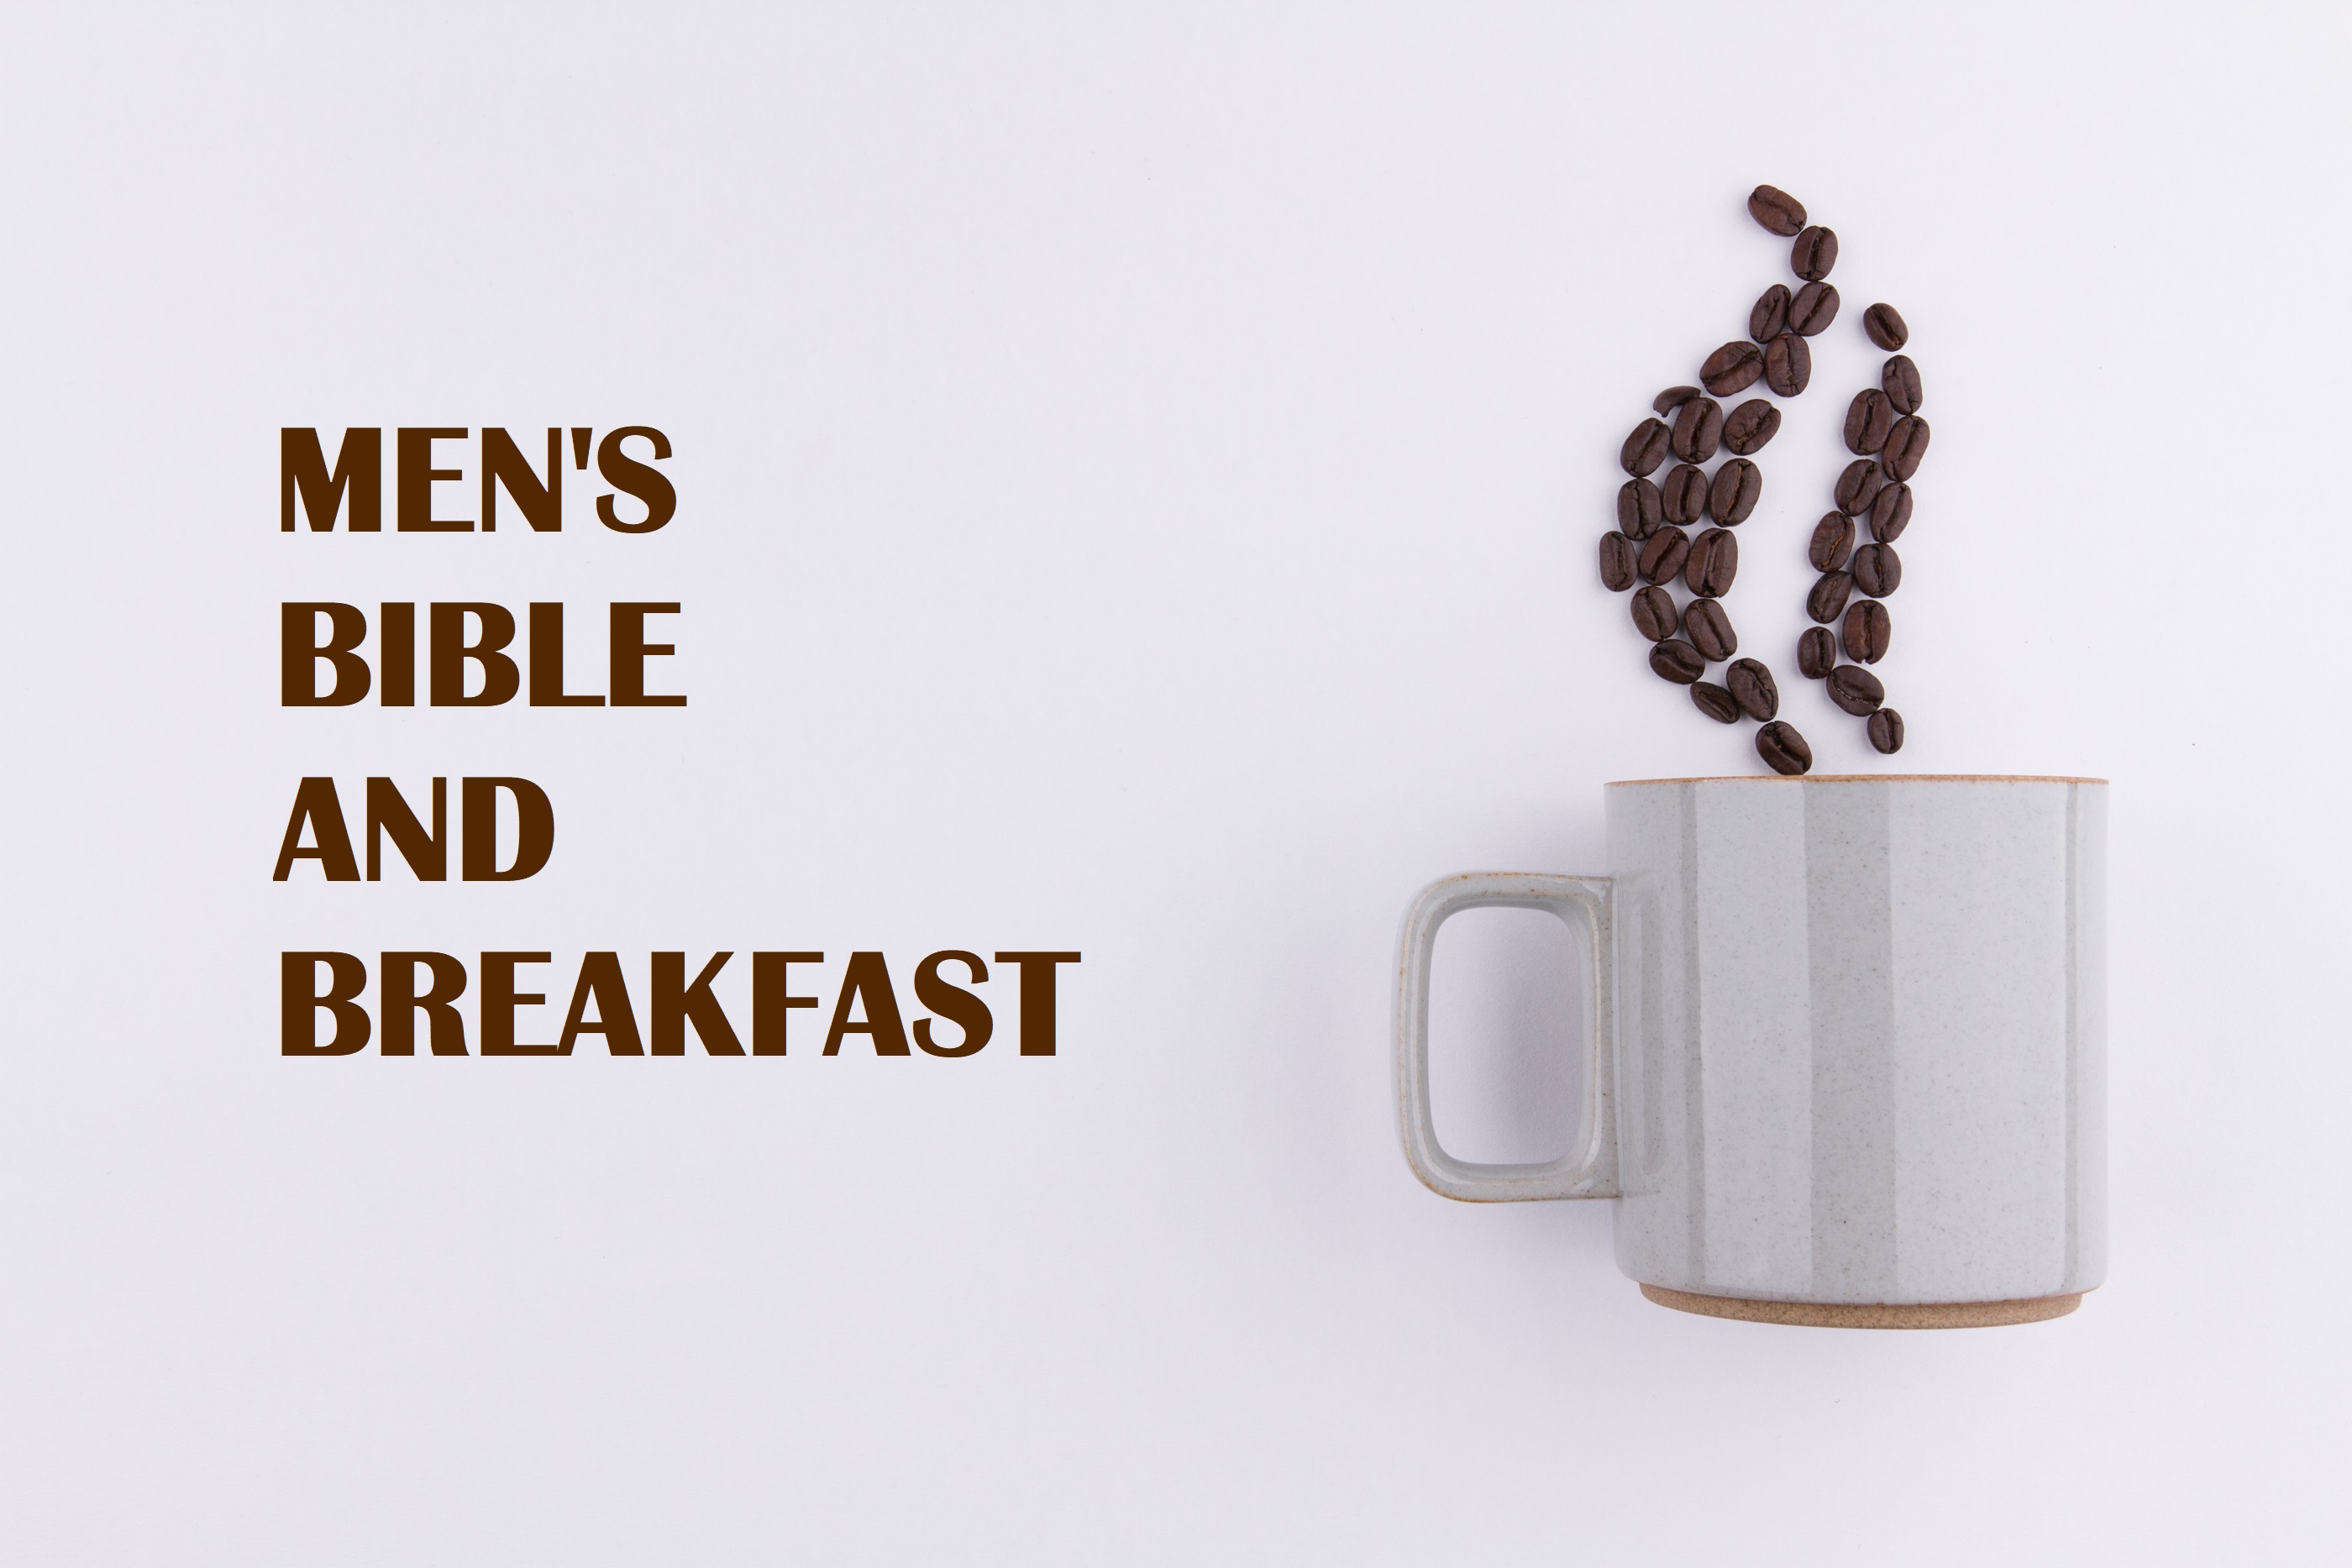 Mens Bible and Breakfast image